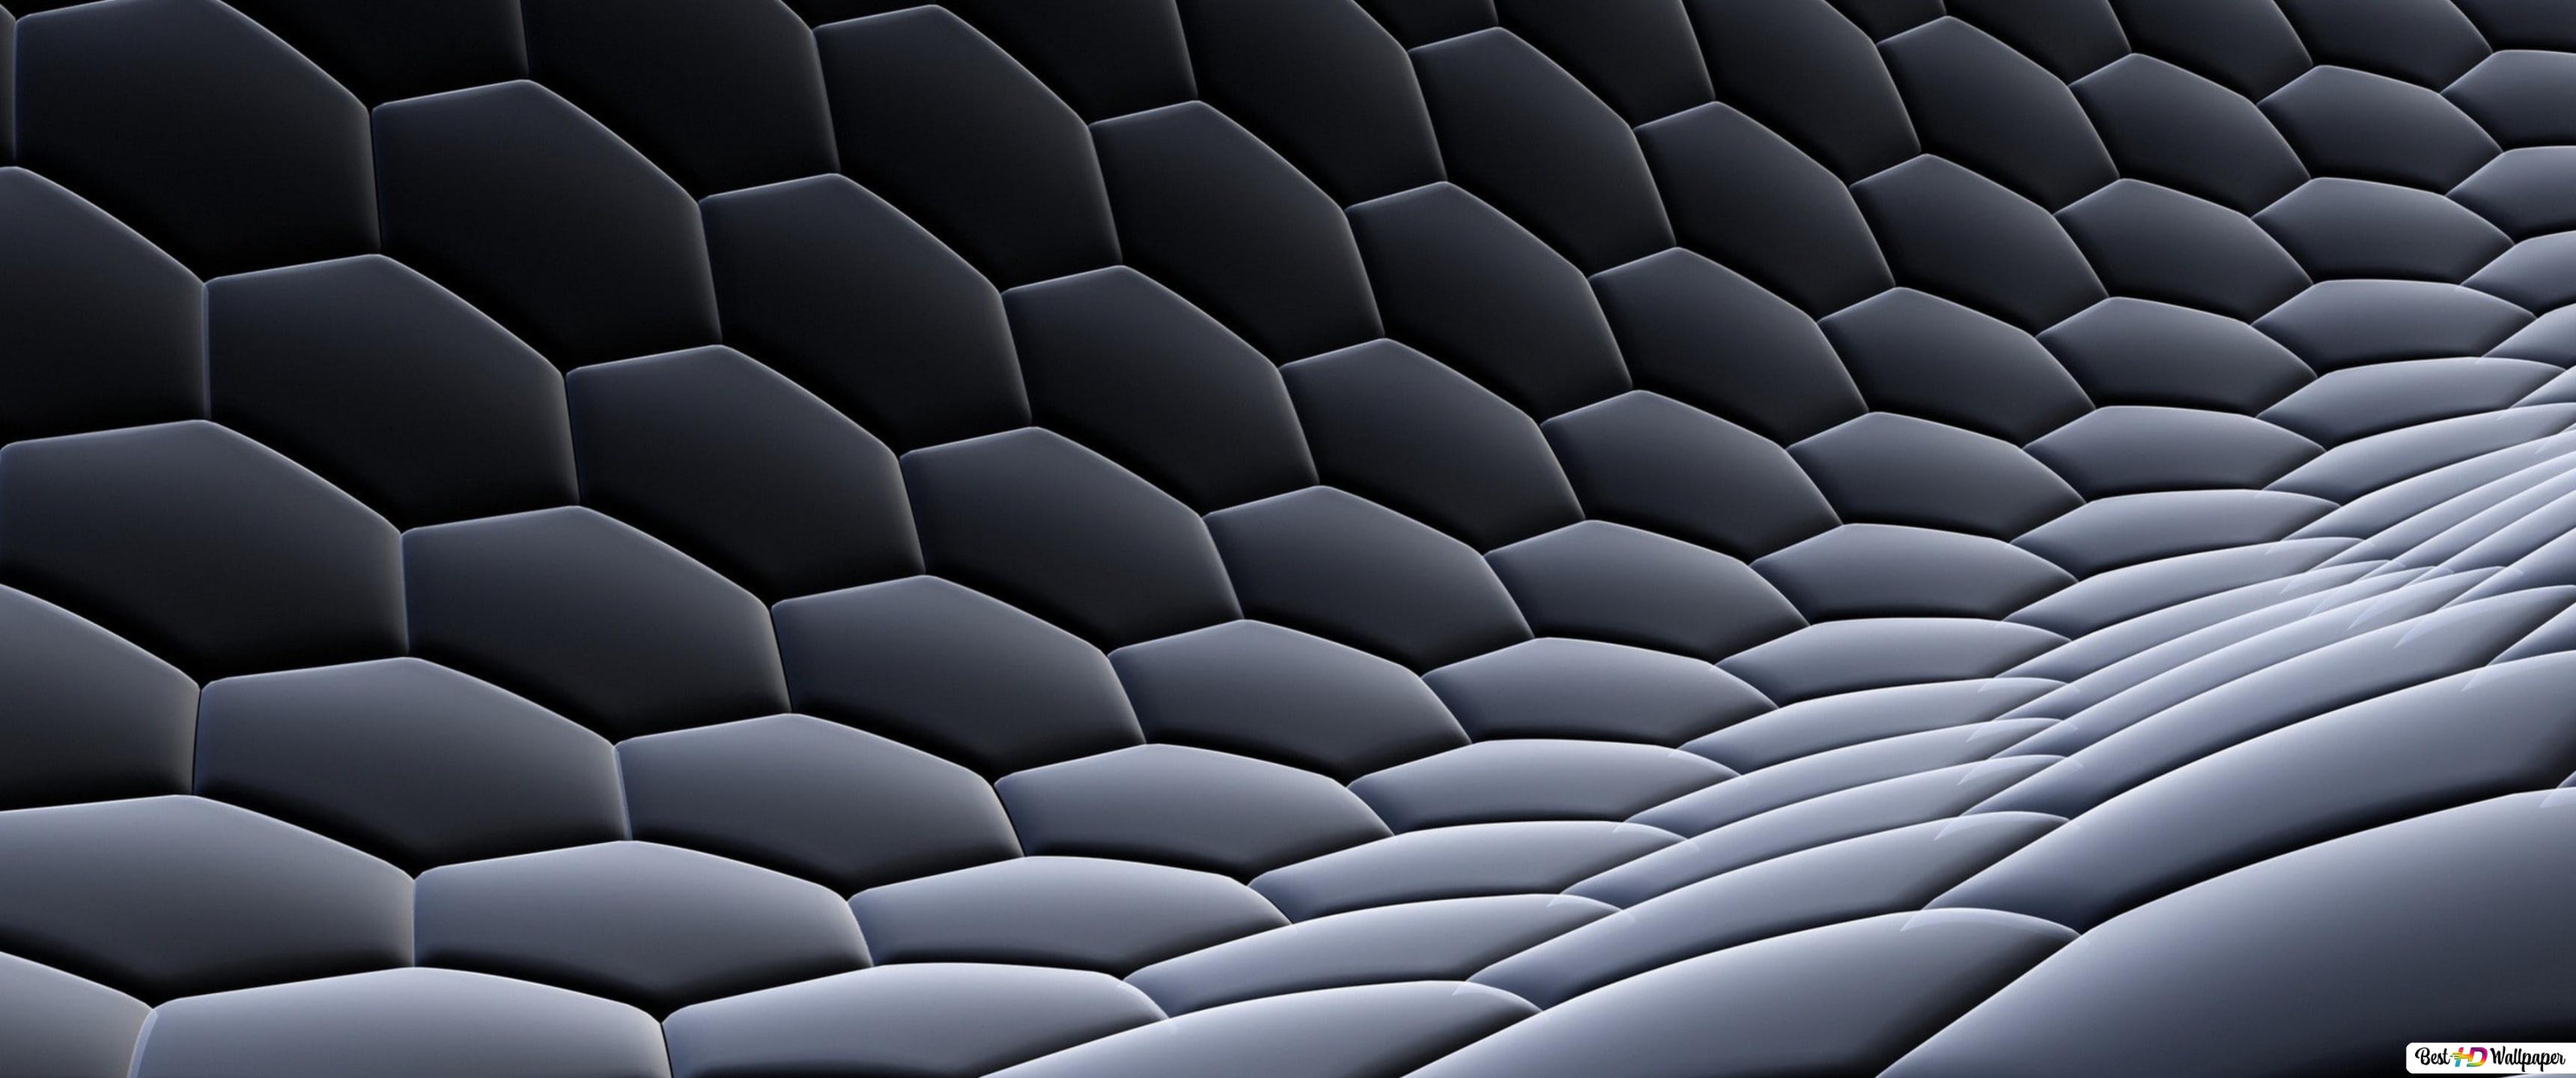 Quilted black snake pattern HD wallpaper download